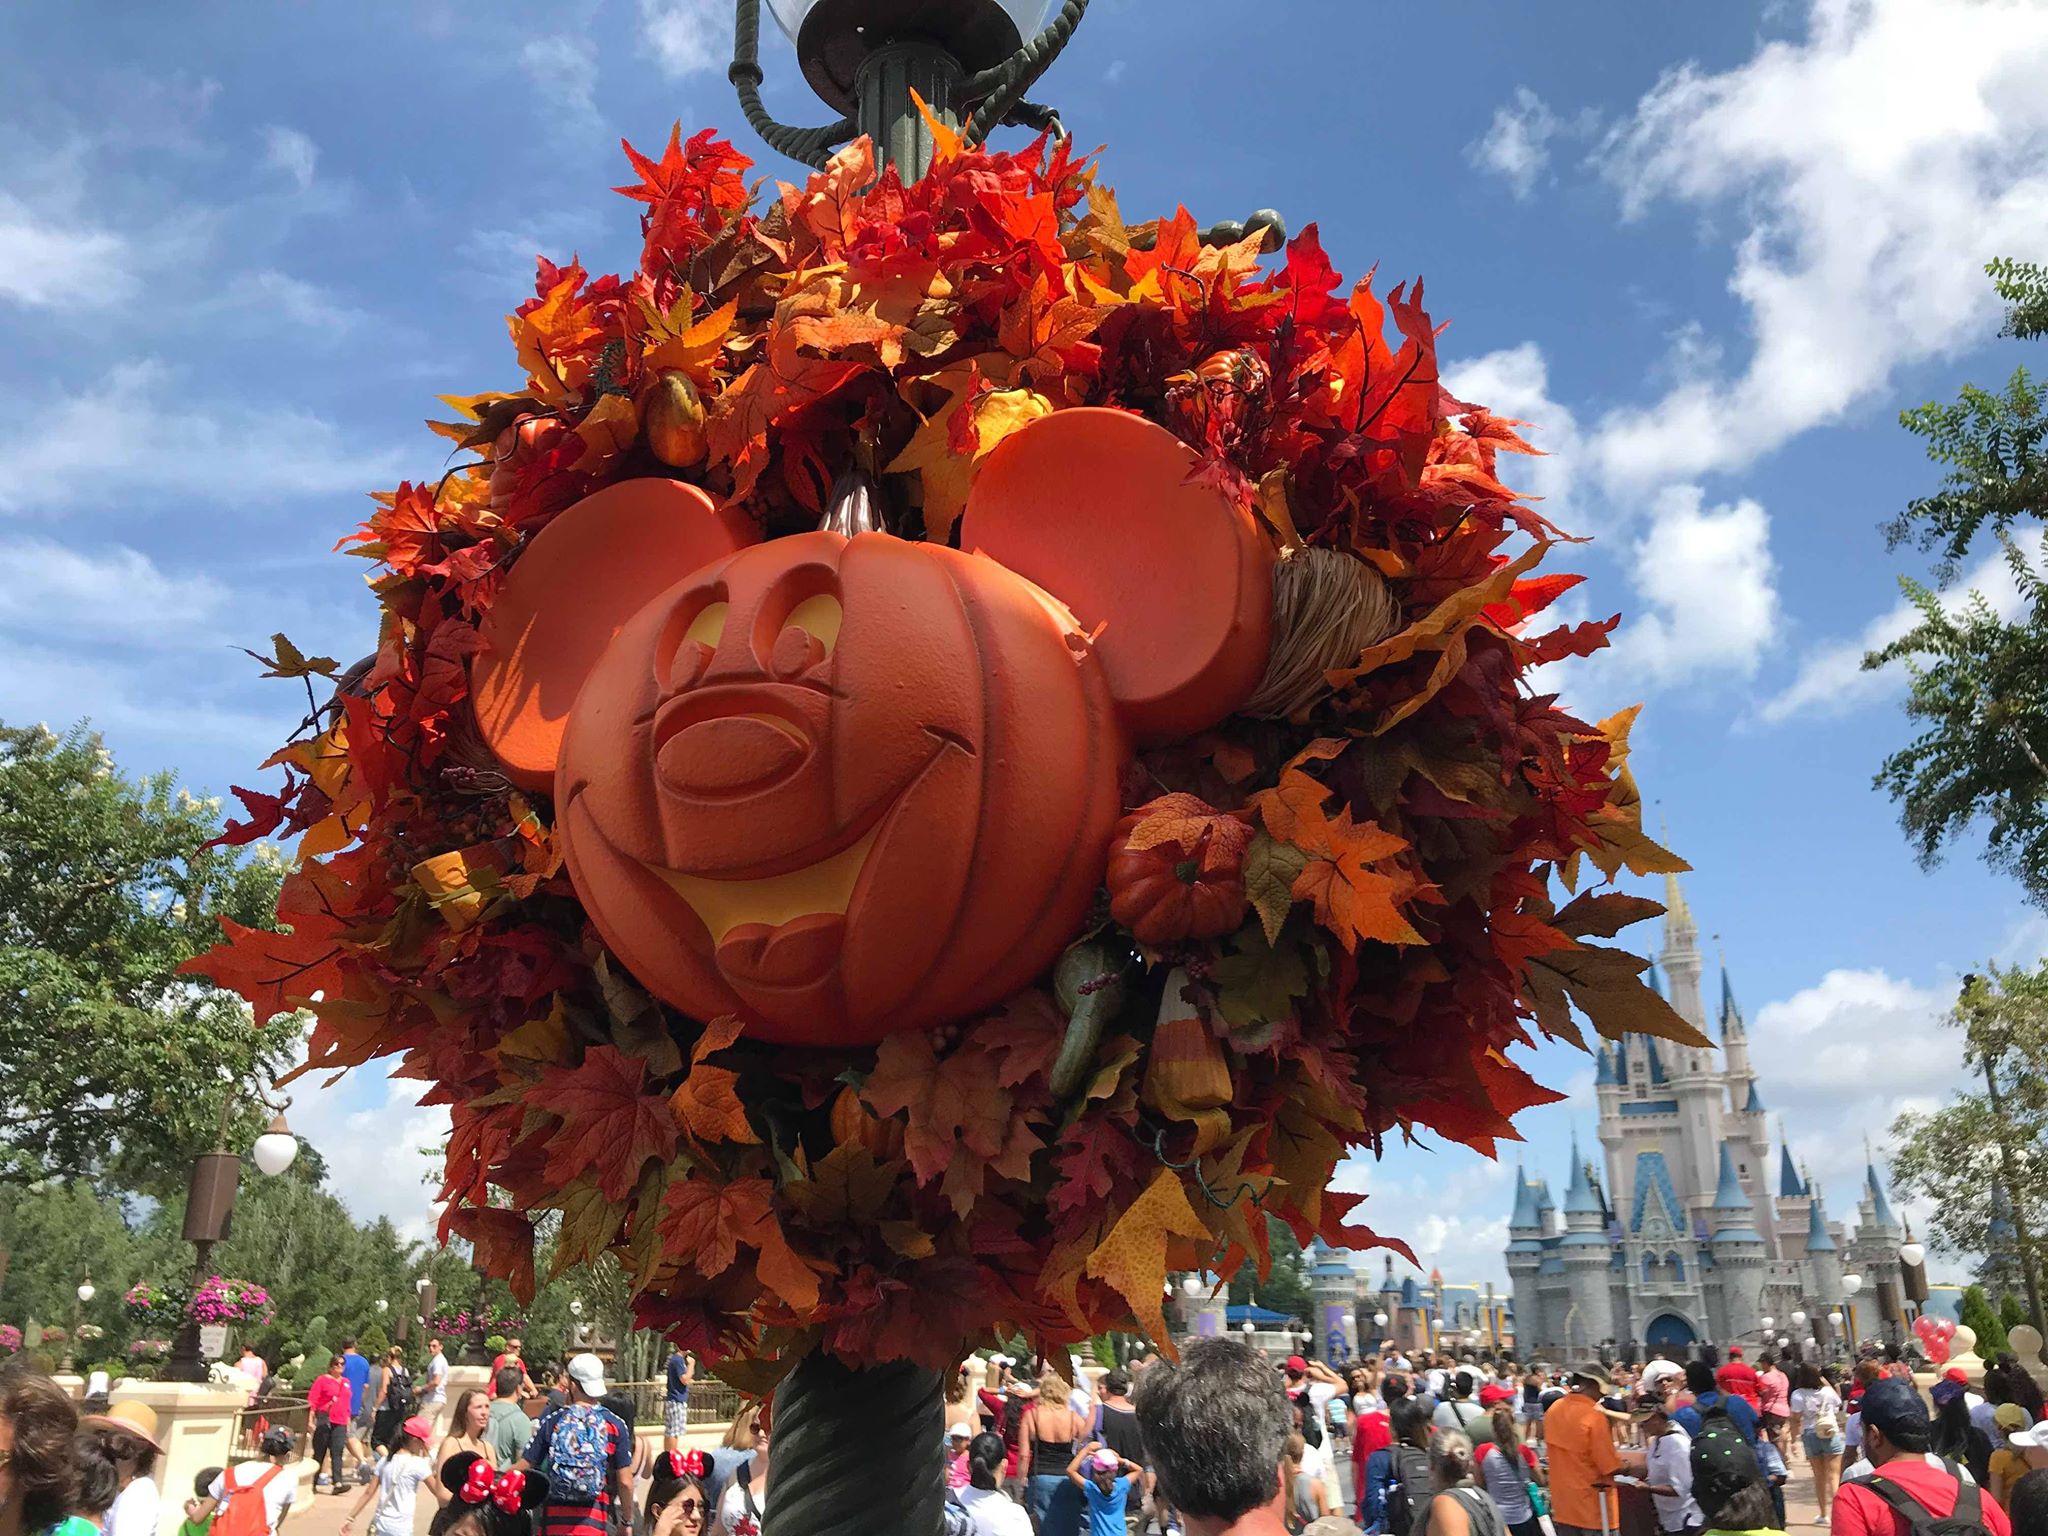 Decorations at Mickey's Not-So-Scary Halloween Party